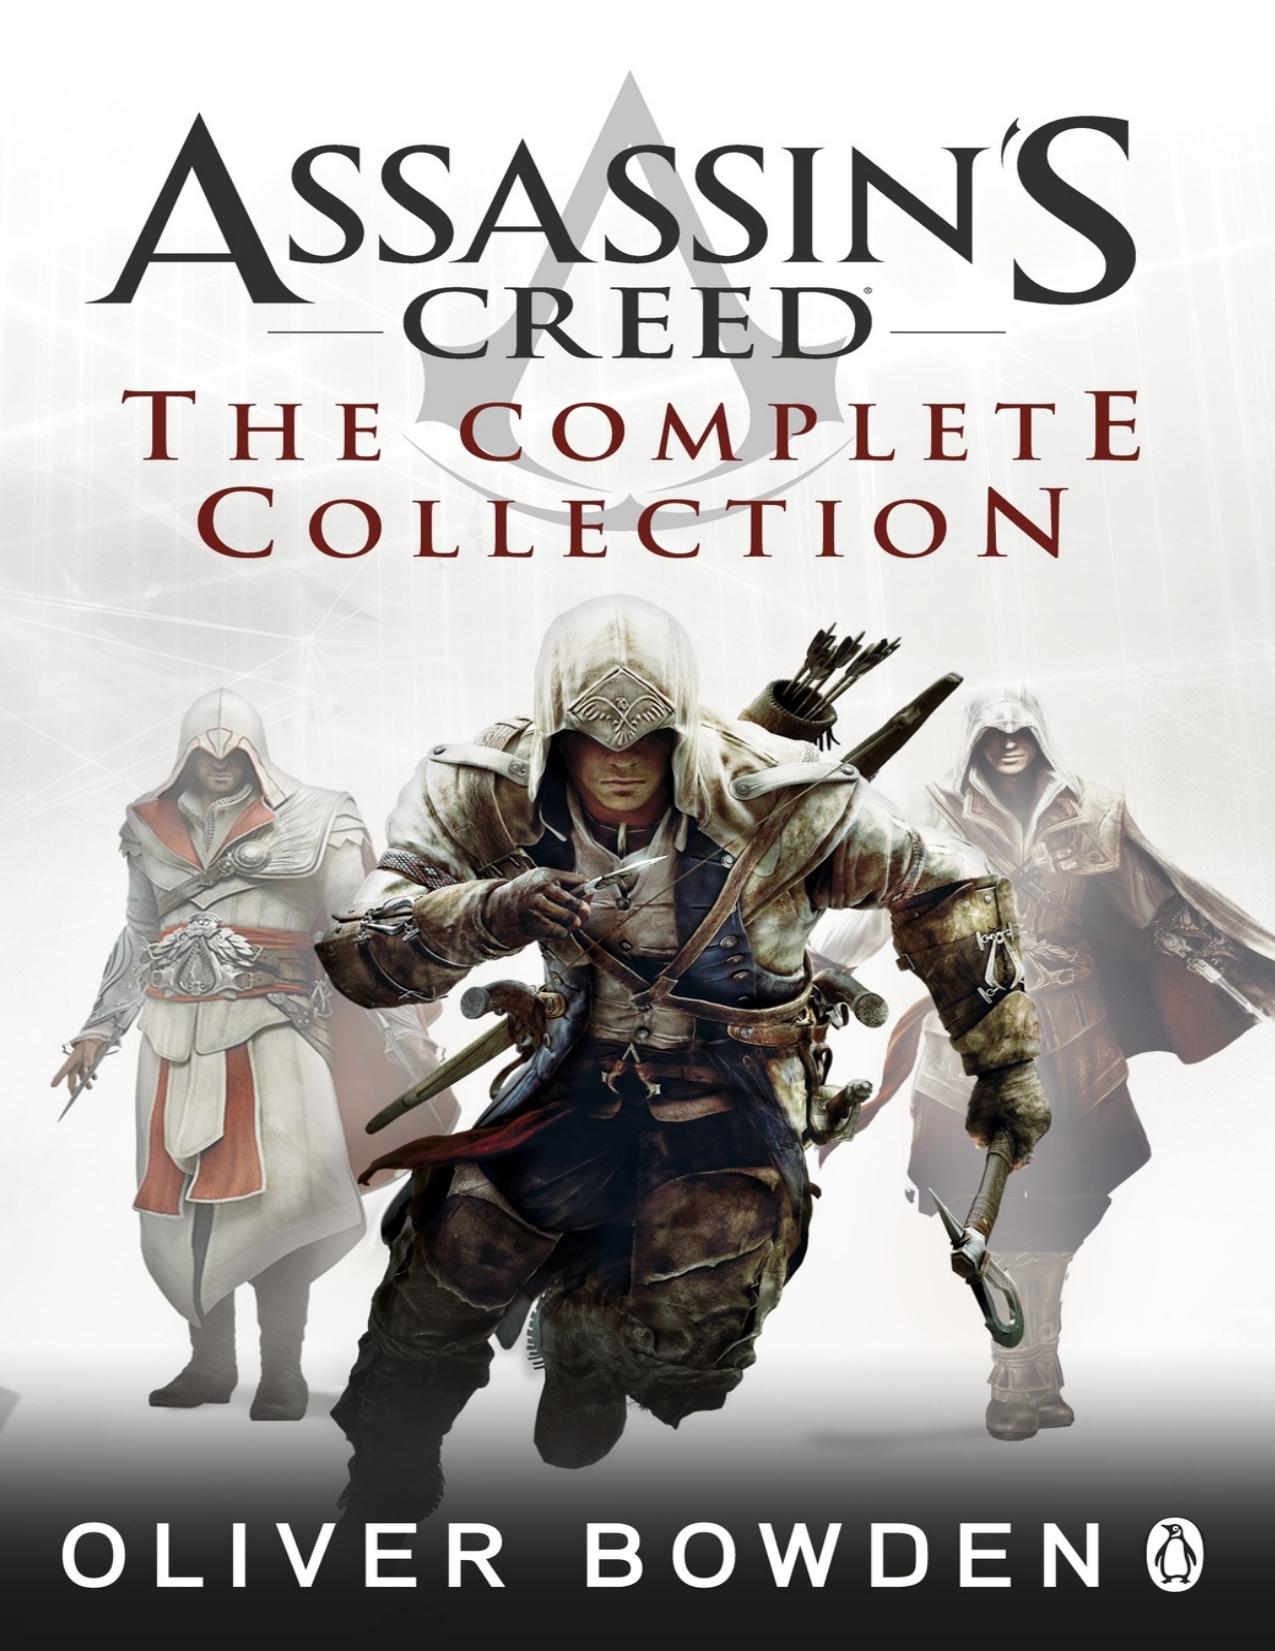 Assassin's Creed: The Complete Collection